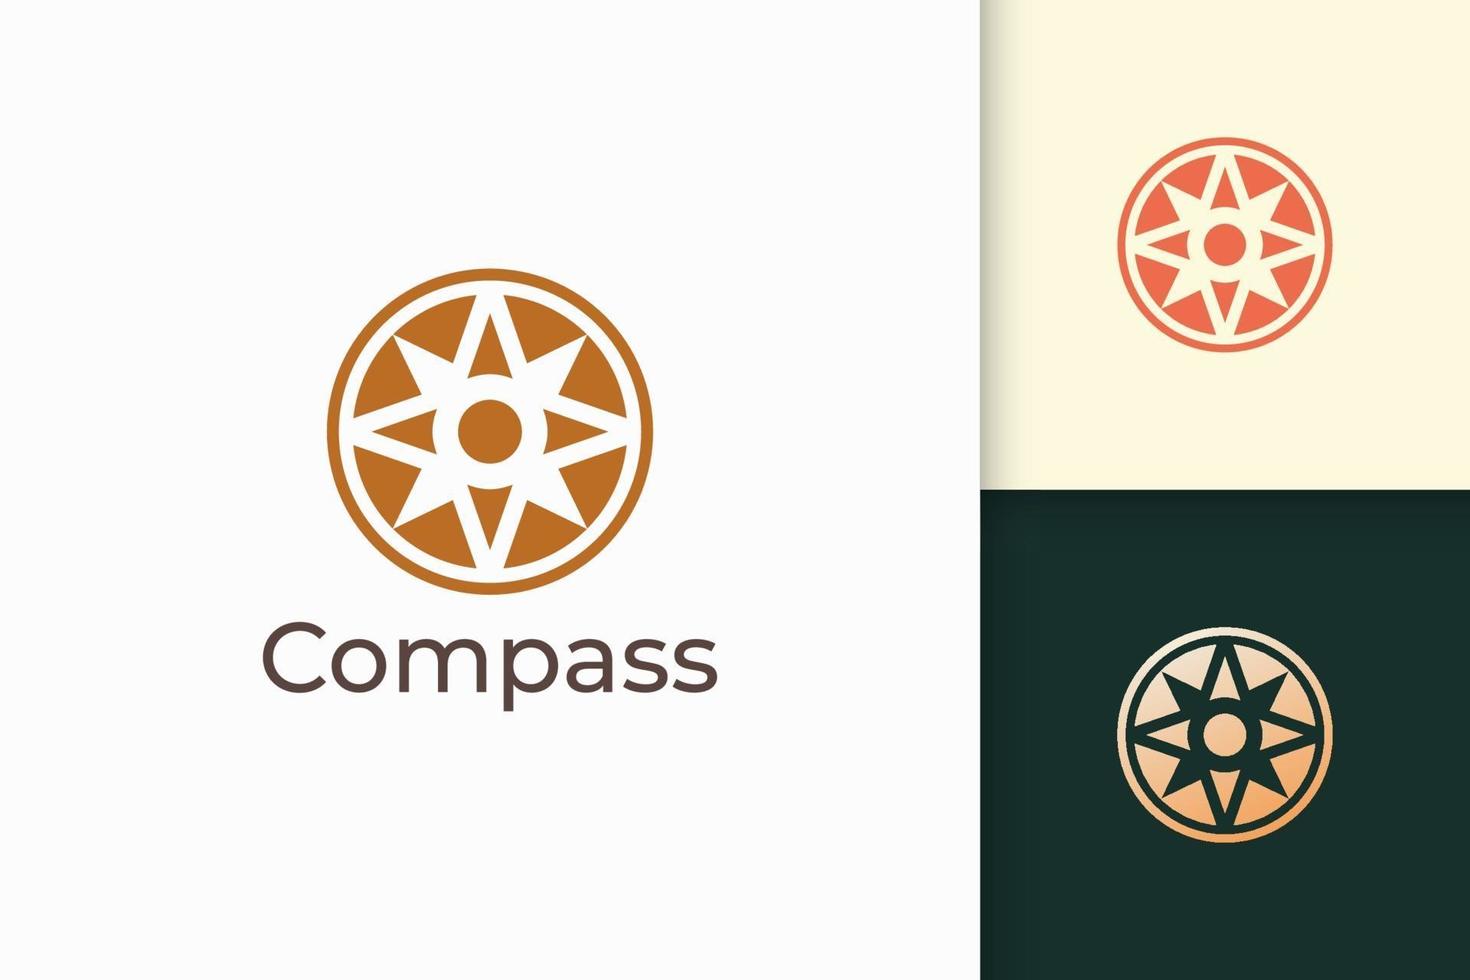 Compass logo in modern and abstract shape for tech company vector